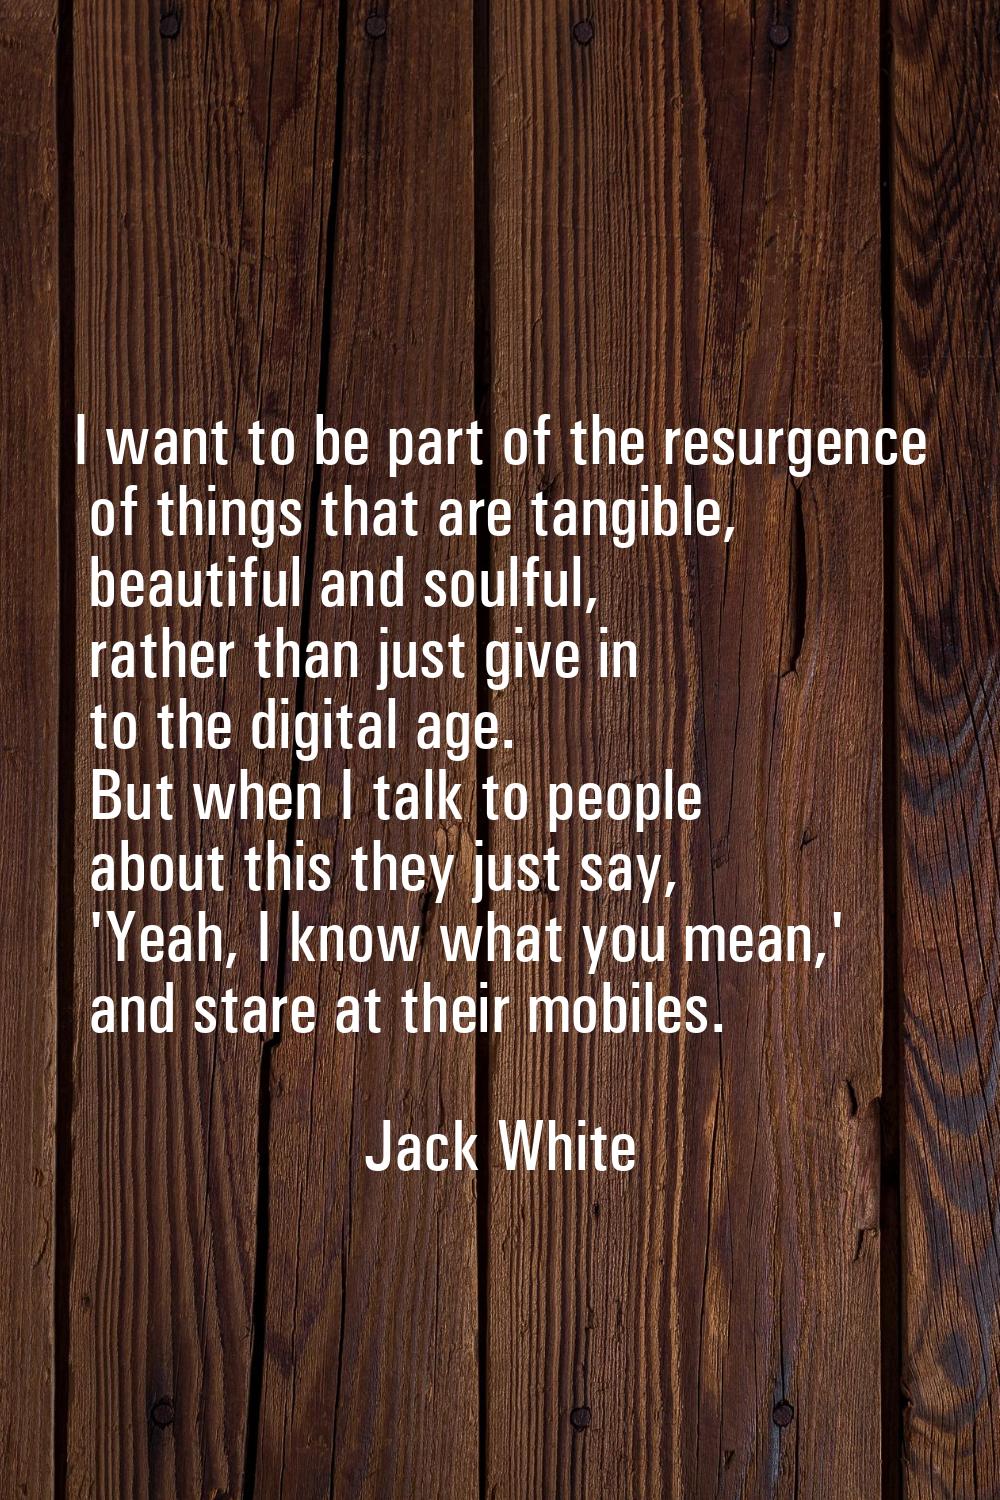 I want to be part of the resurgence of things that are tangible, beautiful and soulful, rather than